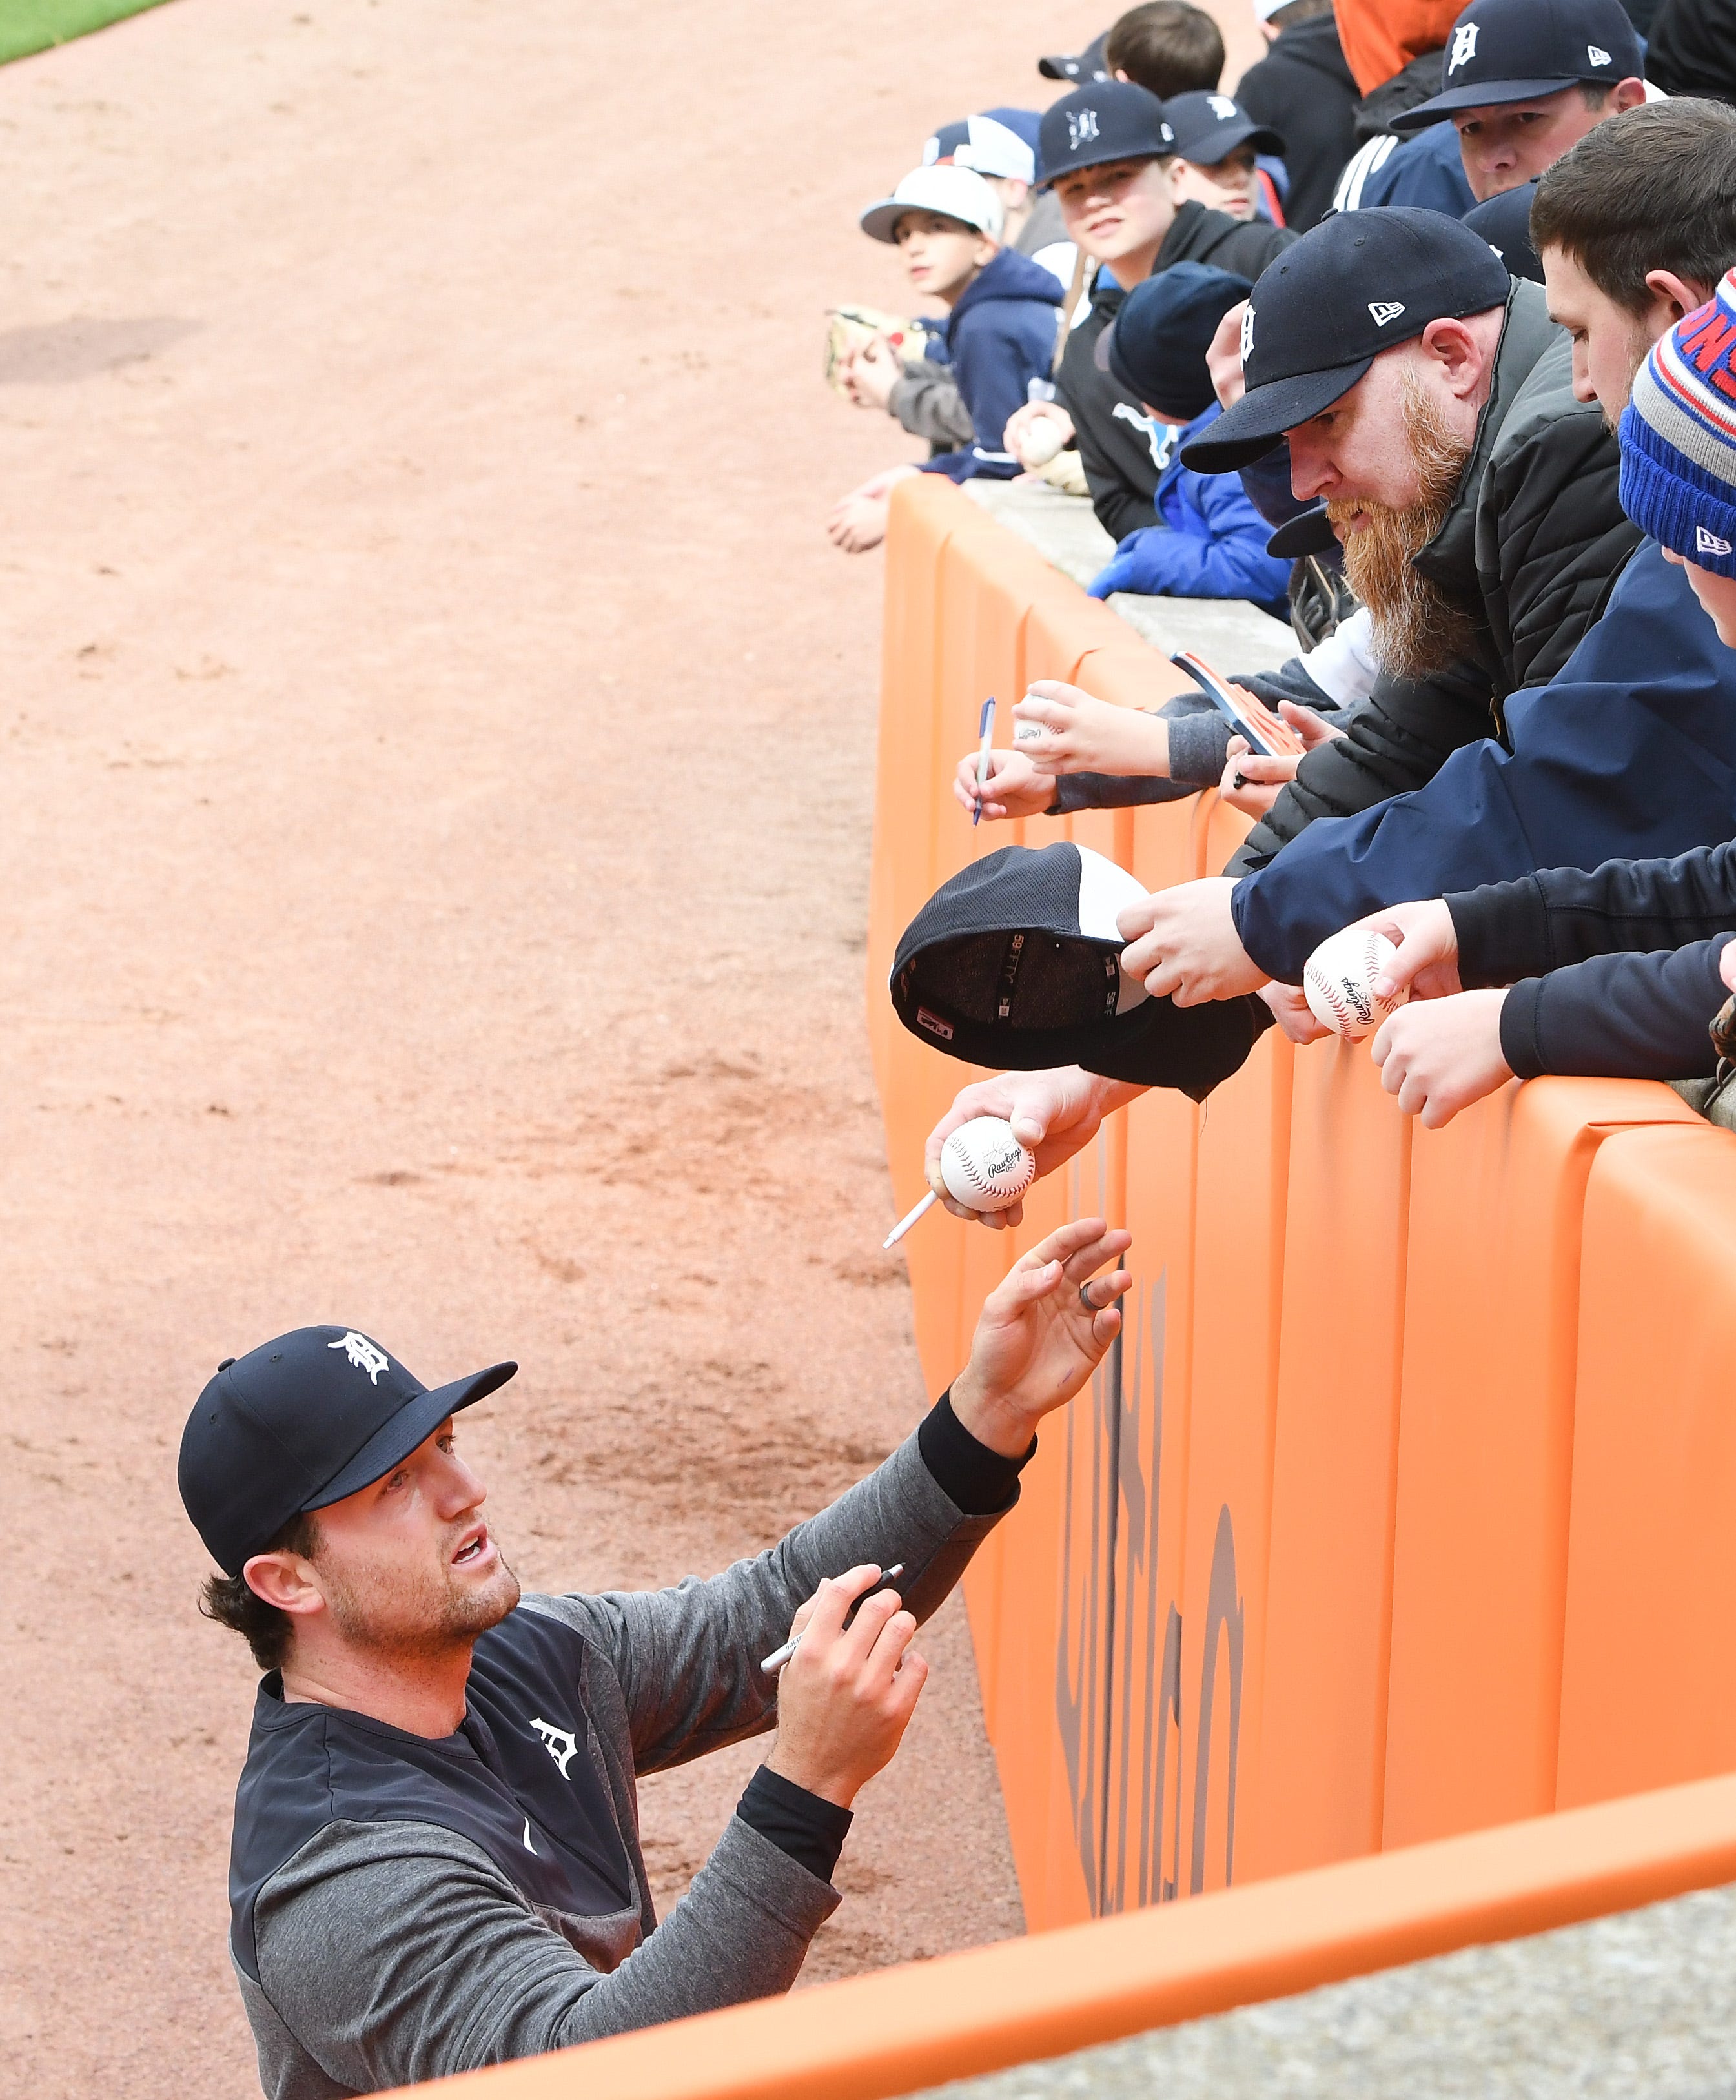 Tigers pitcher Casey Mize signs autographs in the outfield before the game. 
Detroit Tigers home opener at Comerica Park in Detroit, Michigan on April 6, 2023.